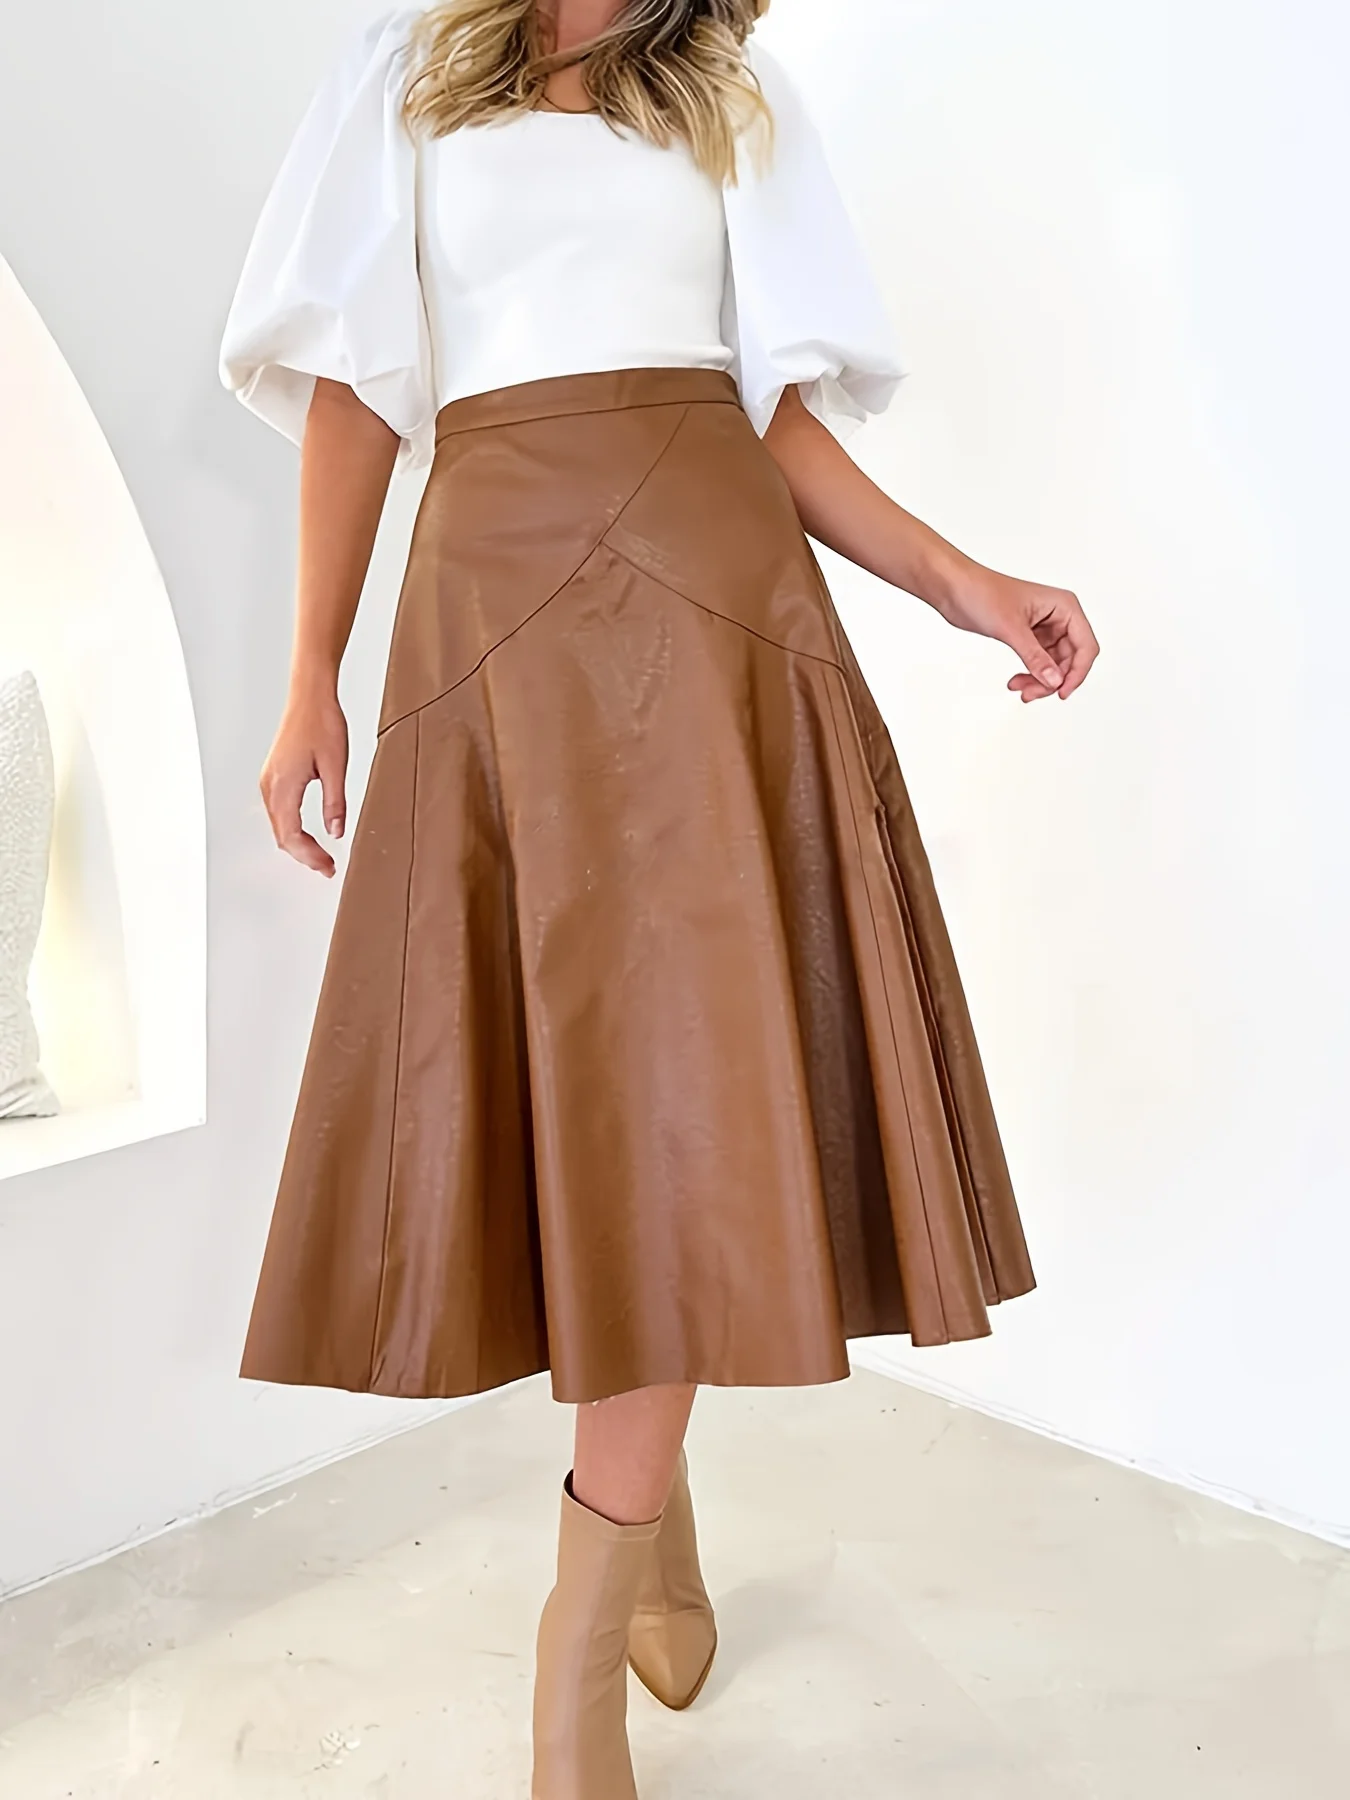 

Parara Plus Size Skirt For Women, Casual Solid PU Leather High Rise Women's Swing A-line Midi Skirts